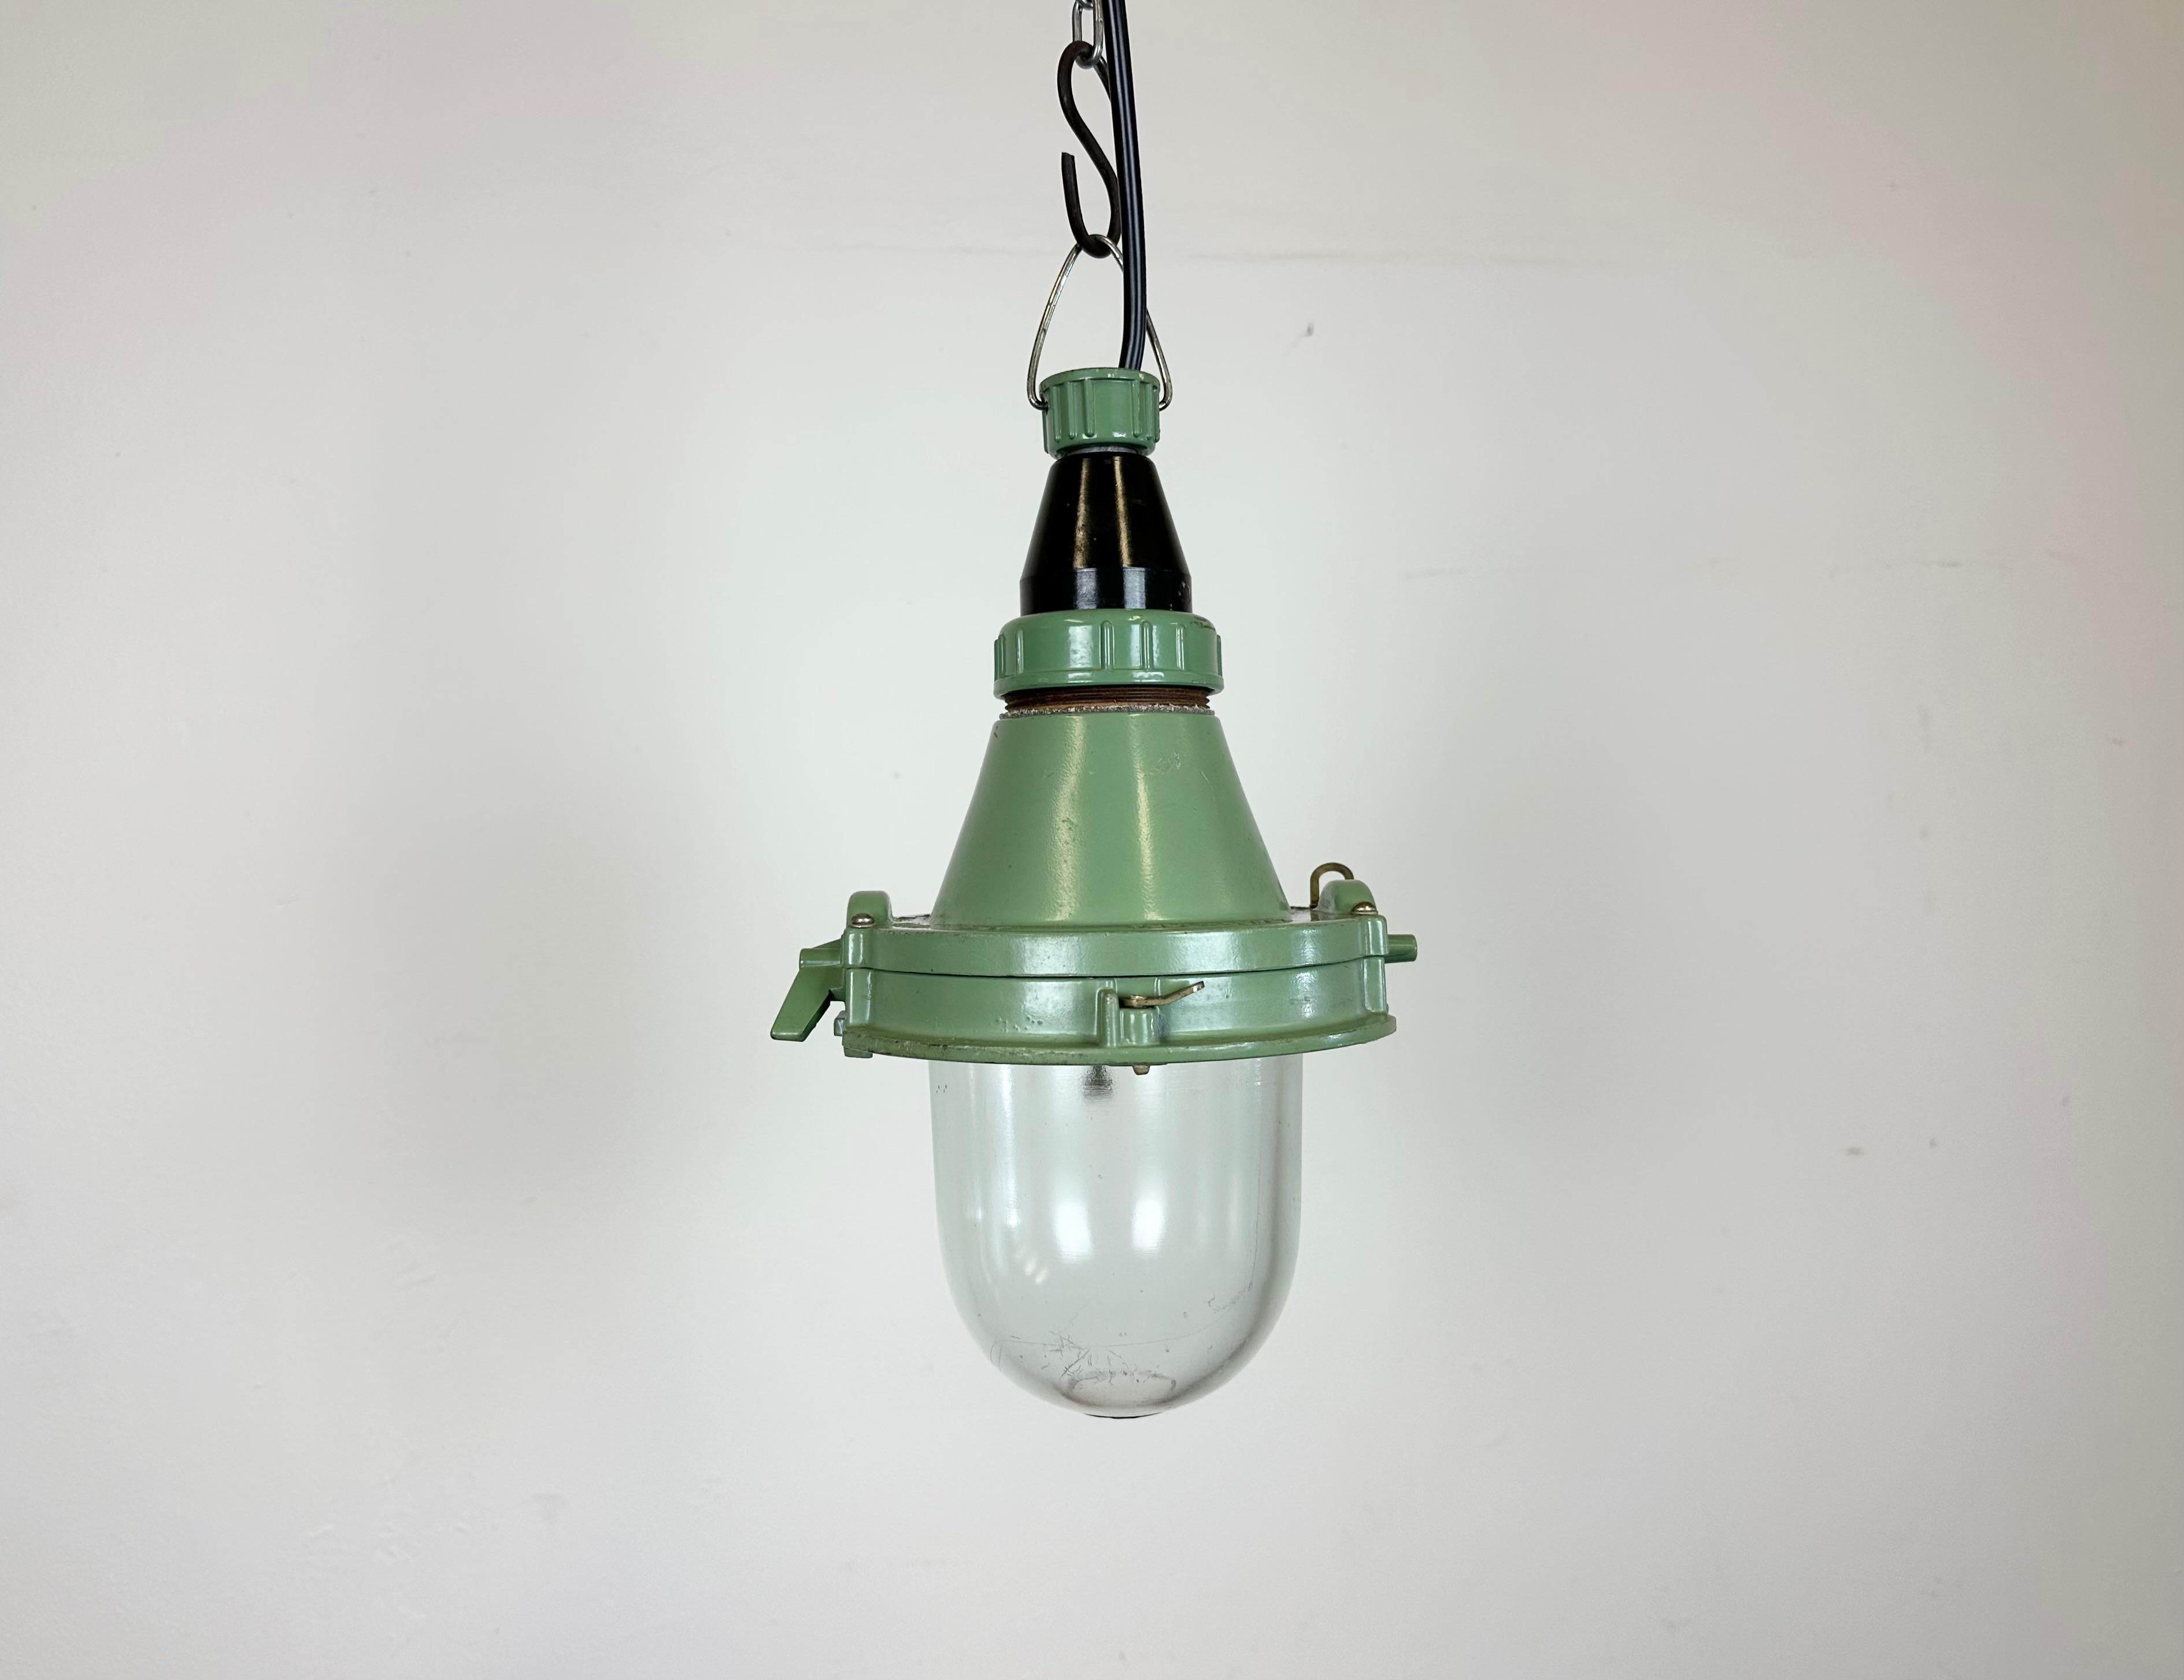 Green industrial light with massive protective glass bulb. Made in former Soviet Union during the 1960s. It features a cast aluminium body with bakelite top and a clear glass cover. The socket requires standard E27 / E26 lightbulbs. Newly wired.